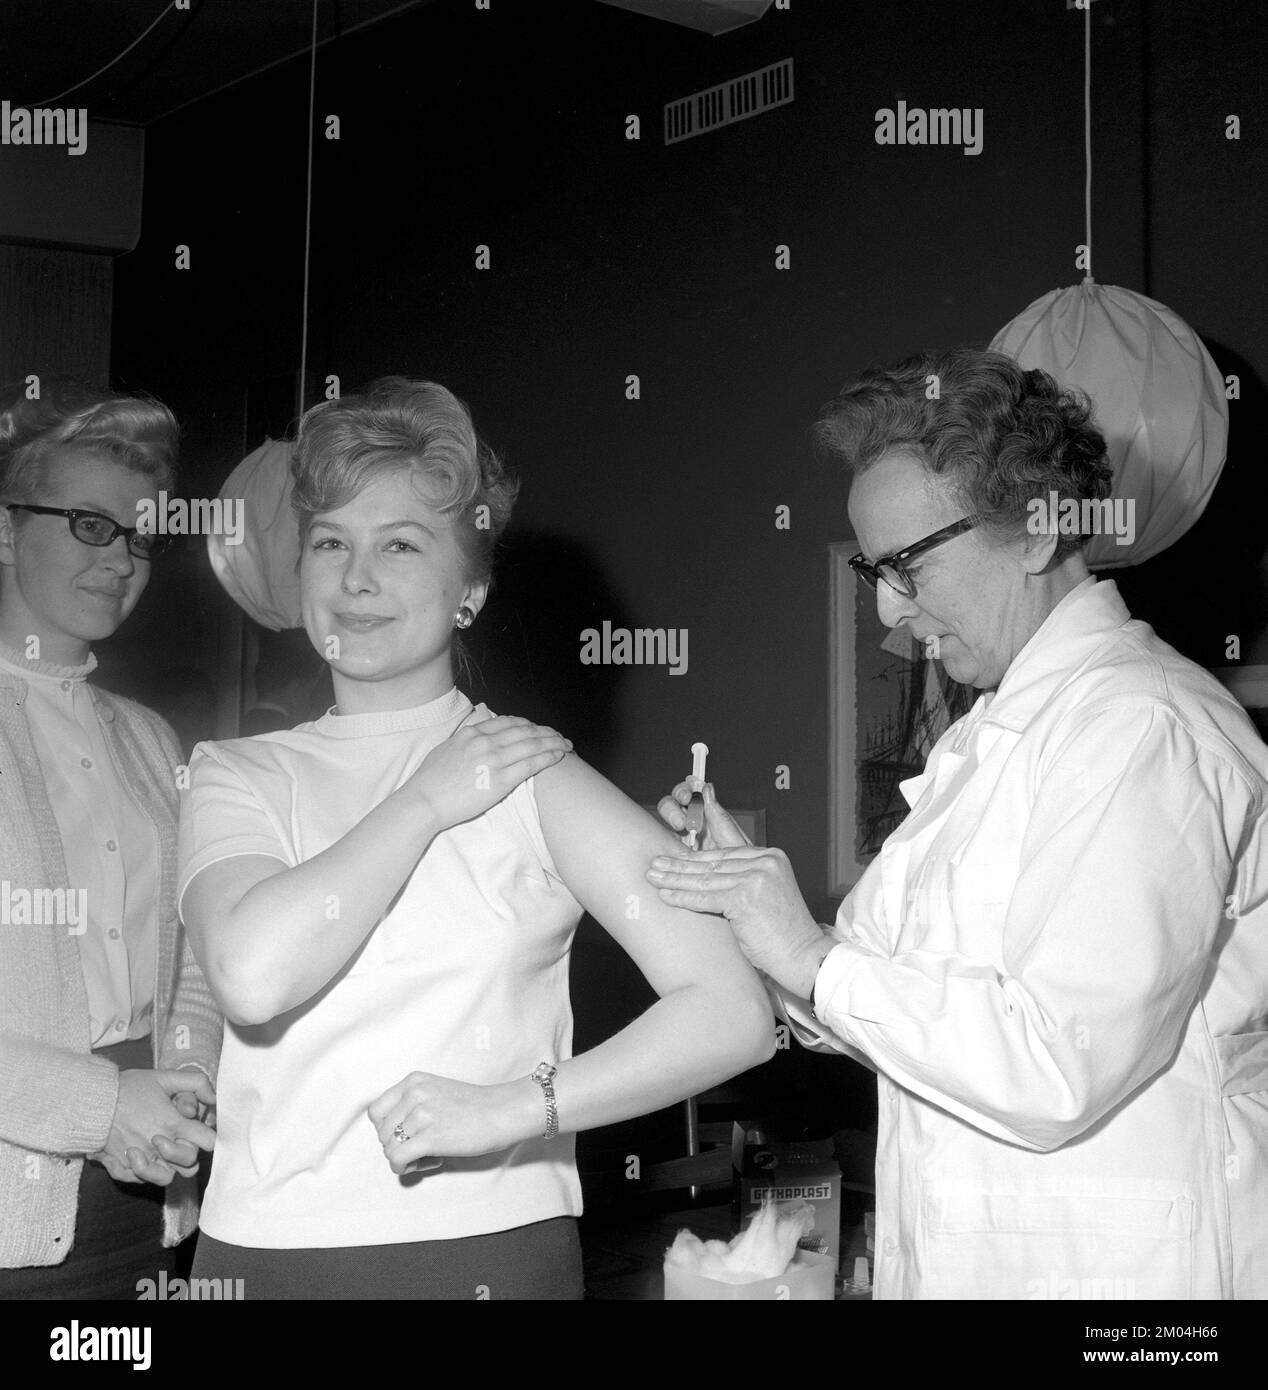 Vaccine in the 1960s. A nurse injects a vaccine in the arm of a young woman. Sweden 1965 Conard ref 5011 Stock Photo